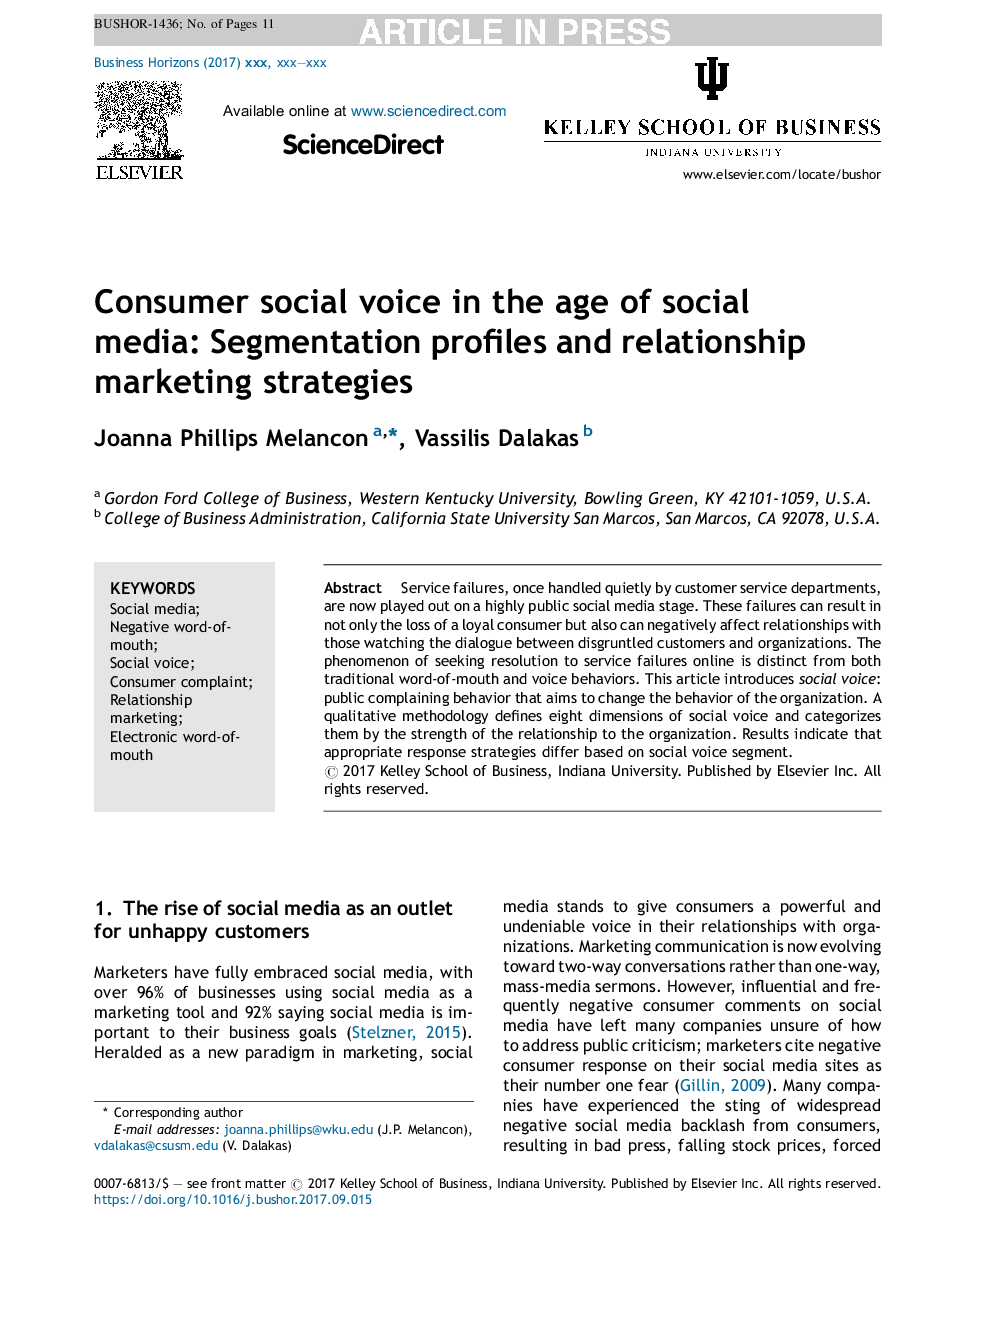 Consumer social voice in the age of social media: Segmentation profiles and relationship marketing strategies